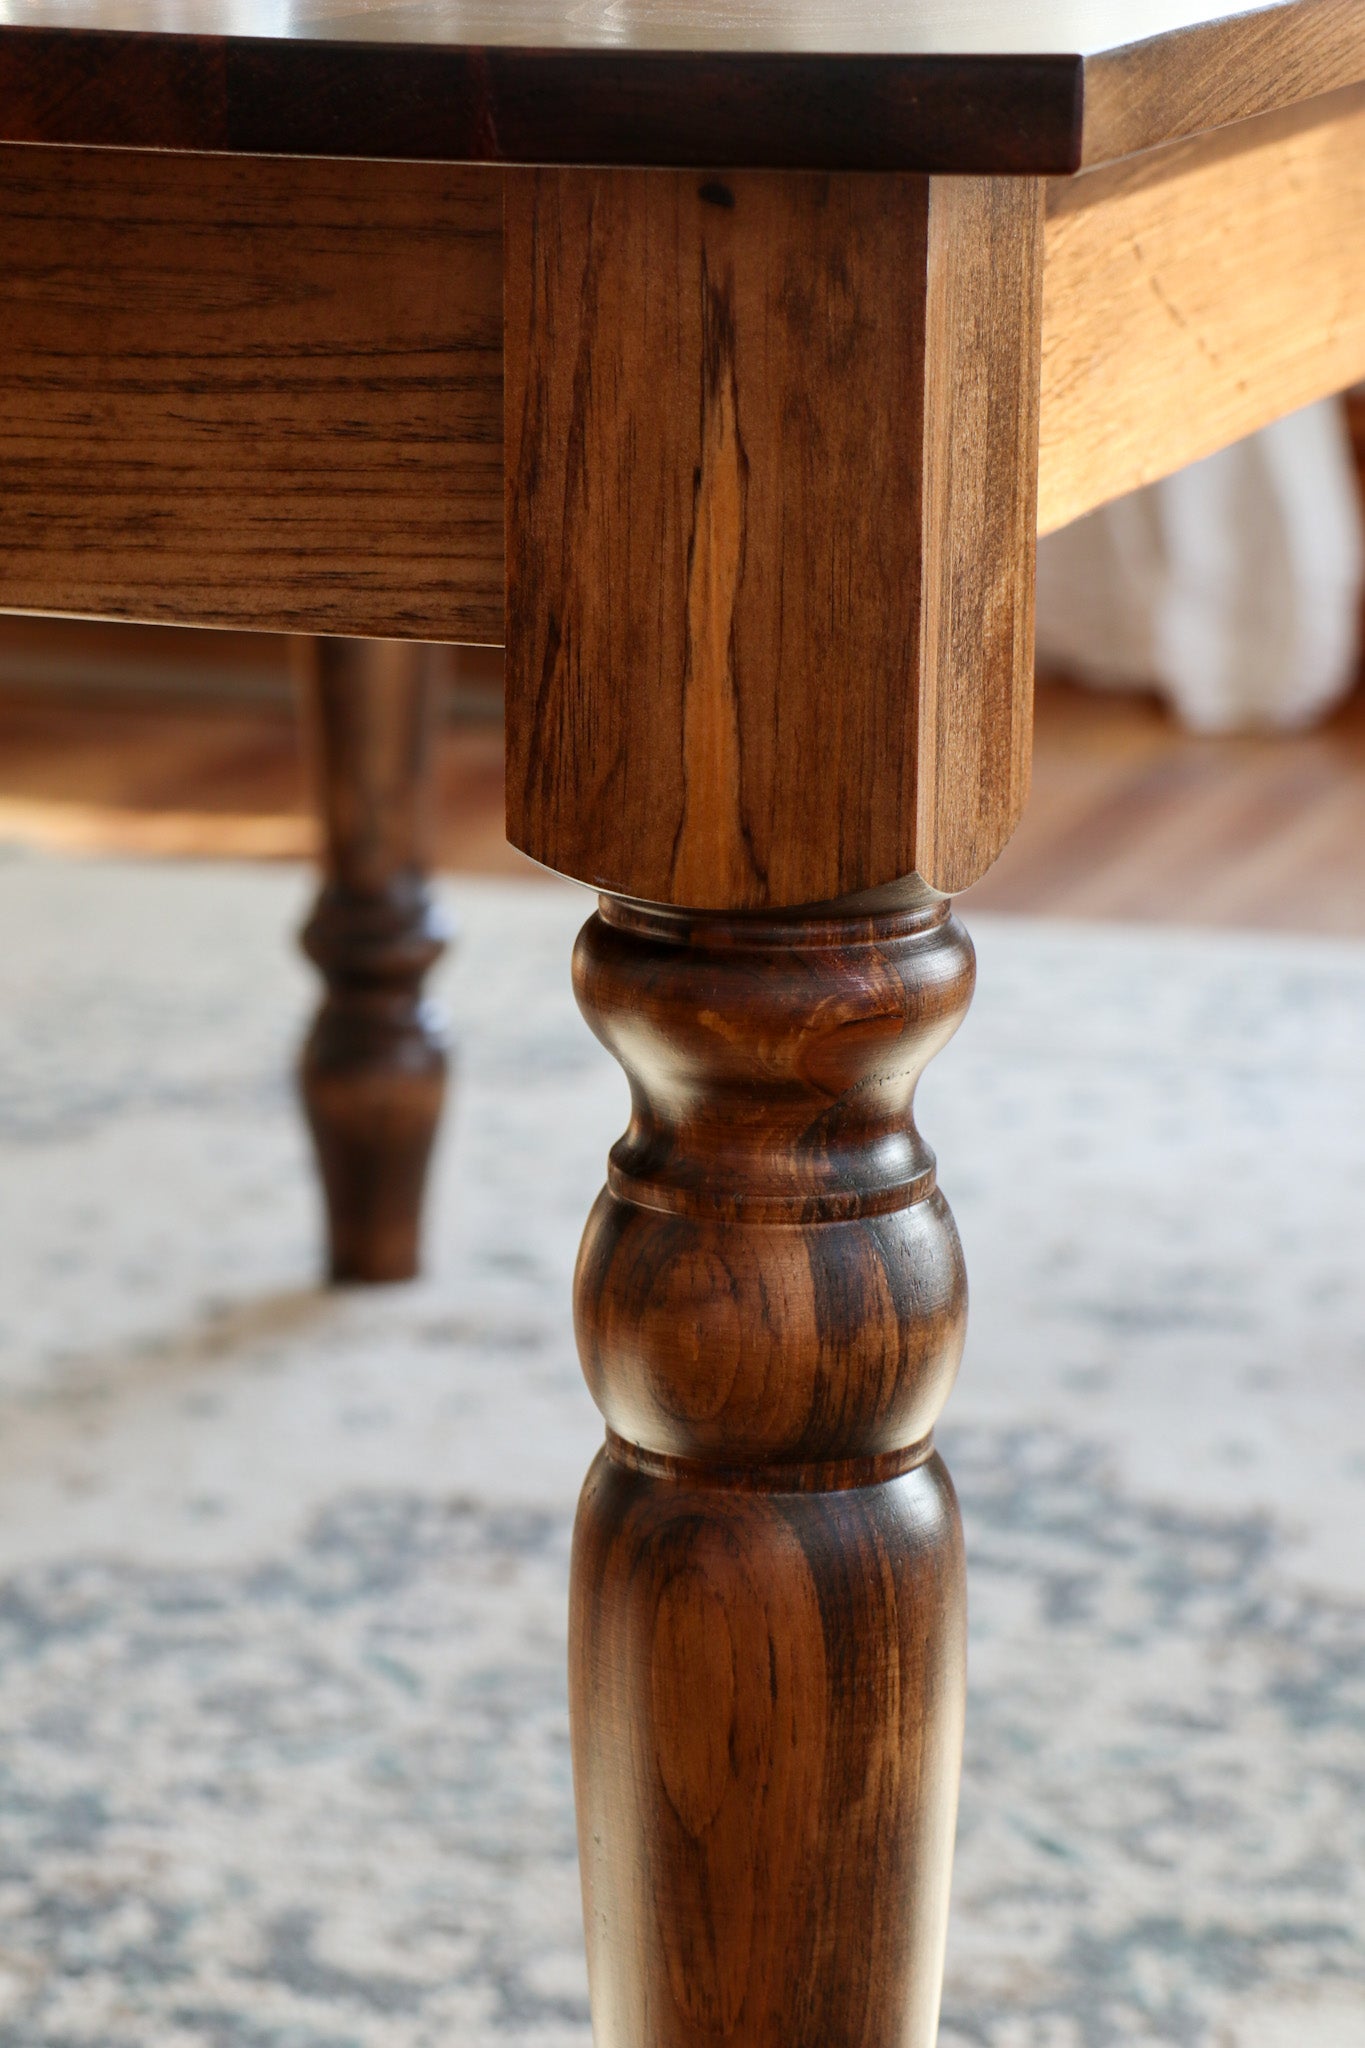 Classic Farmhouse Dining Table with Turned Legs